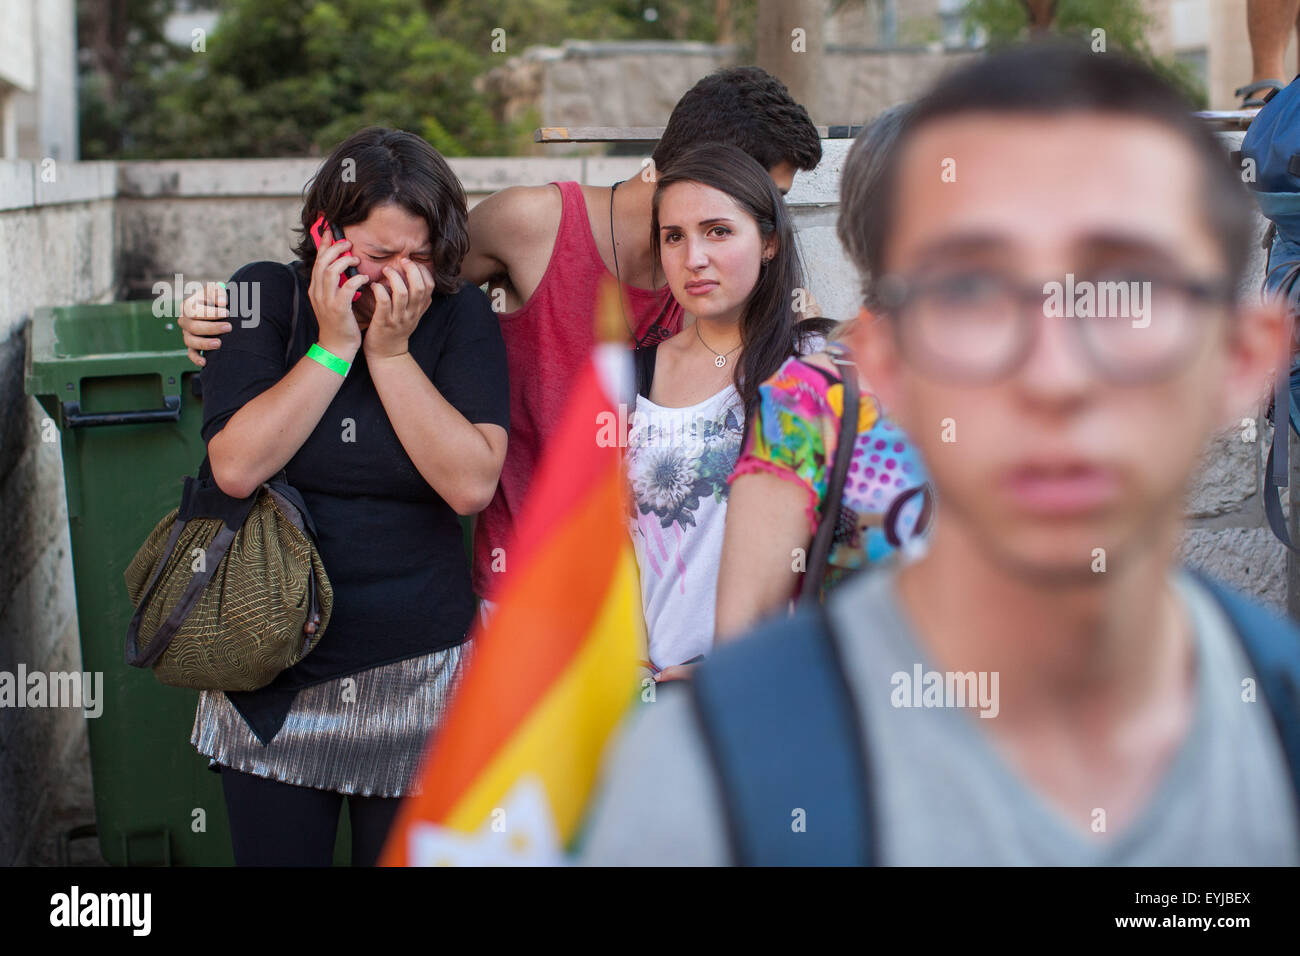 Jerusalem. 30th July, 2015. A woman cries while making a phone call after a stabbing attack during the annual gay pride parade in Jerusalem, . Six people were stabbed at Jerusalem's annual gay pride parade on Thursday, in one of the gravest attacks on the gay community in Israel, Israeli officials and eyewitnesses told Xinhua. A police spokesperson said the assailant was captured and identified as Yishai Schlissel, a Jewish ultra-Orthodox man who carried out a similar attack in 2005, injuring three people. Credit:  Xinhua/Alamy Live News Stock Photo